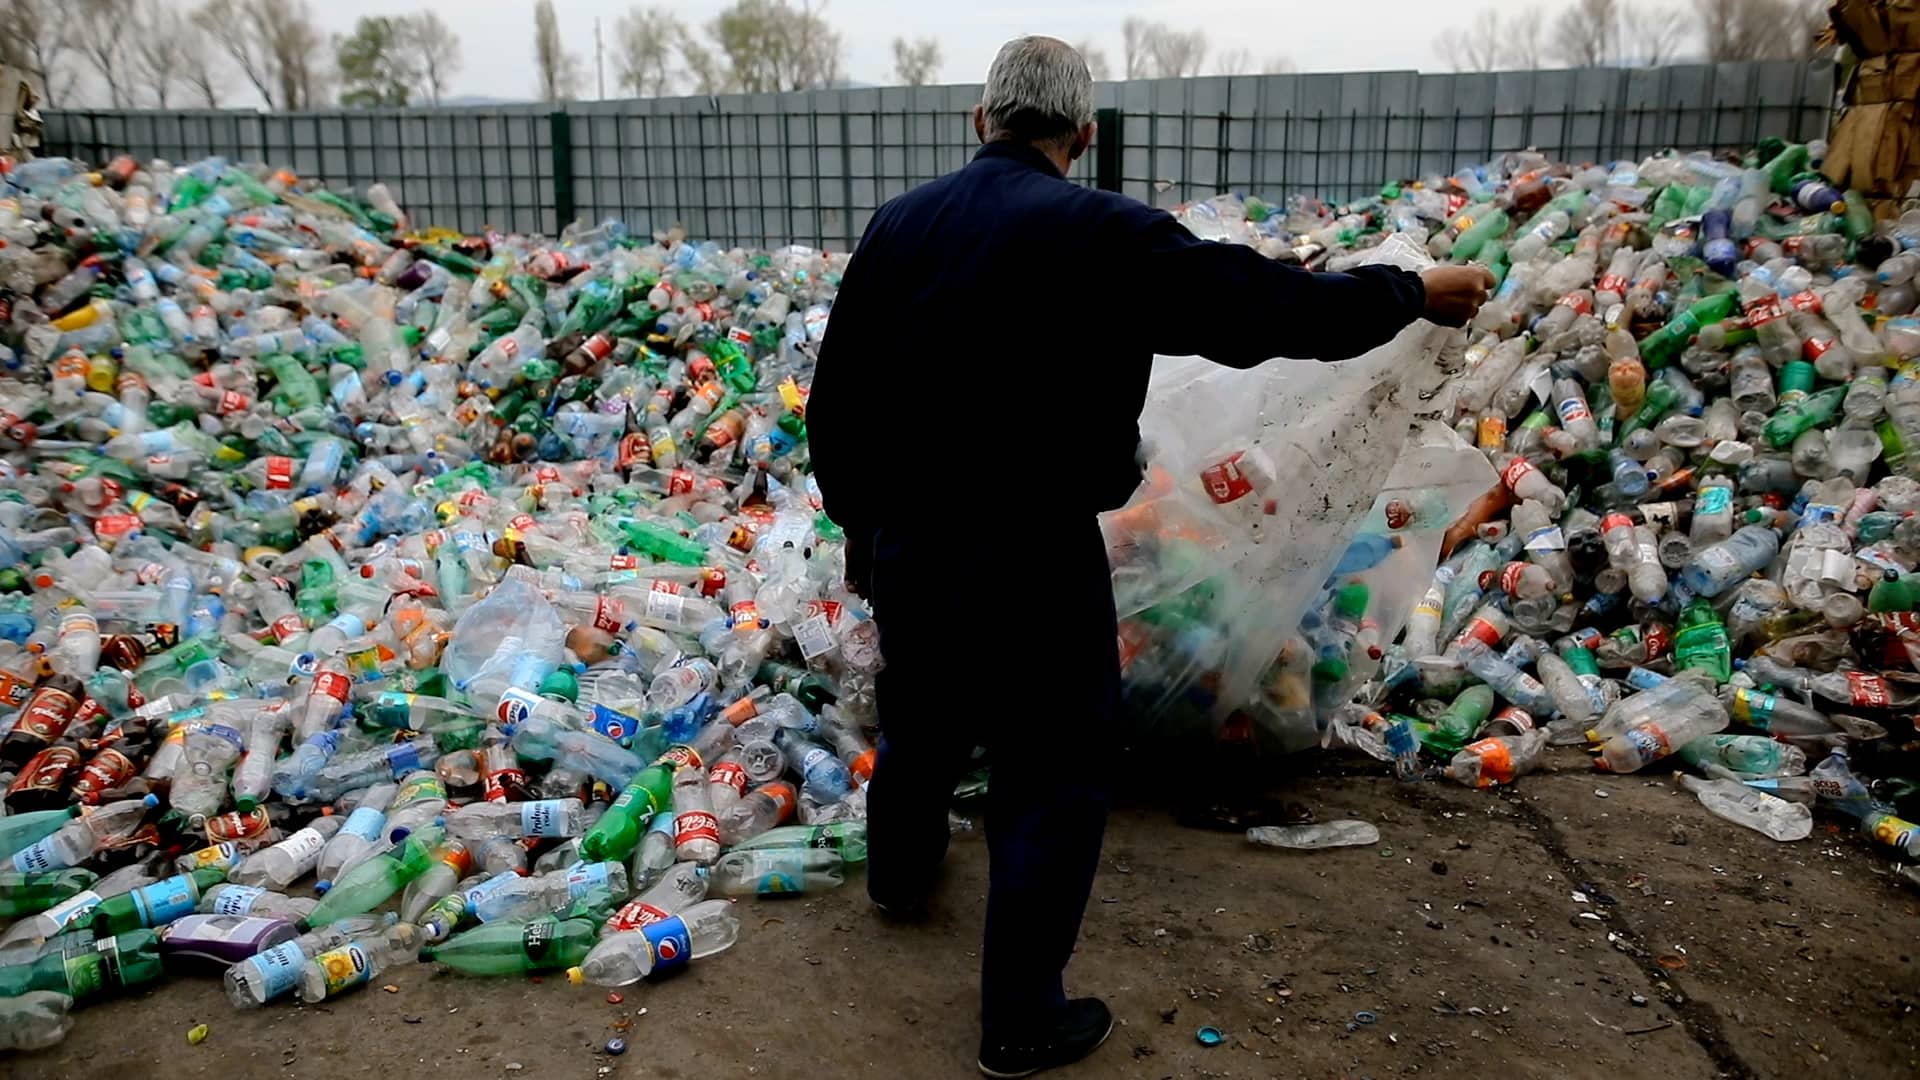 A sanitary worker deals with an influx of plastic bottles at a recycling center in Serbia